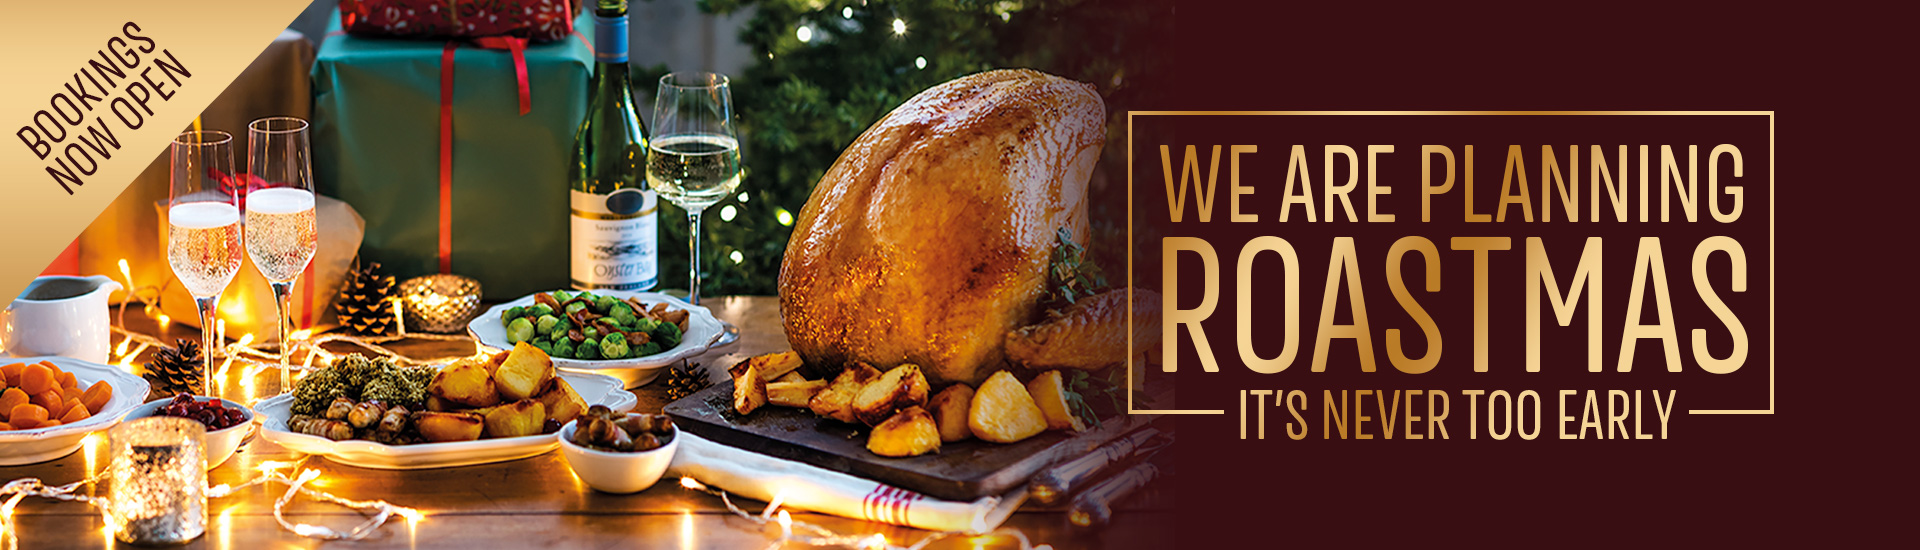 Christmas 2022 at your local Toby Carvery Snaresbrook | Home of the Roast